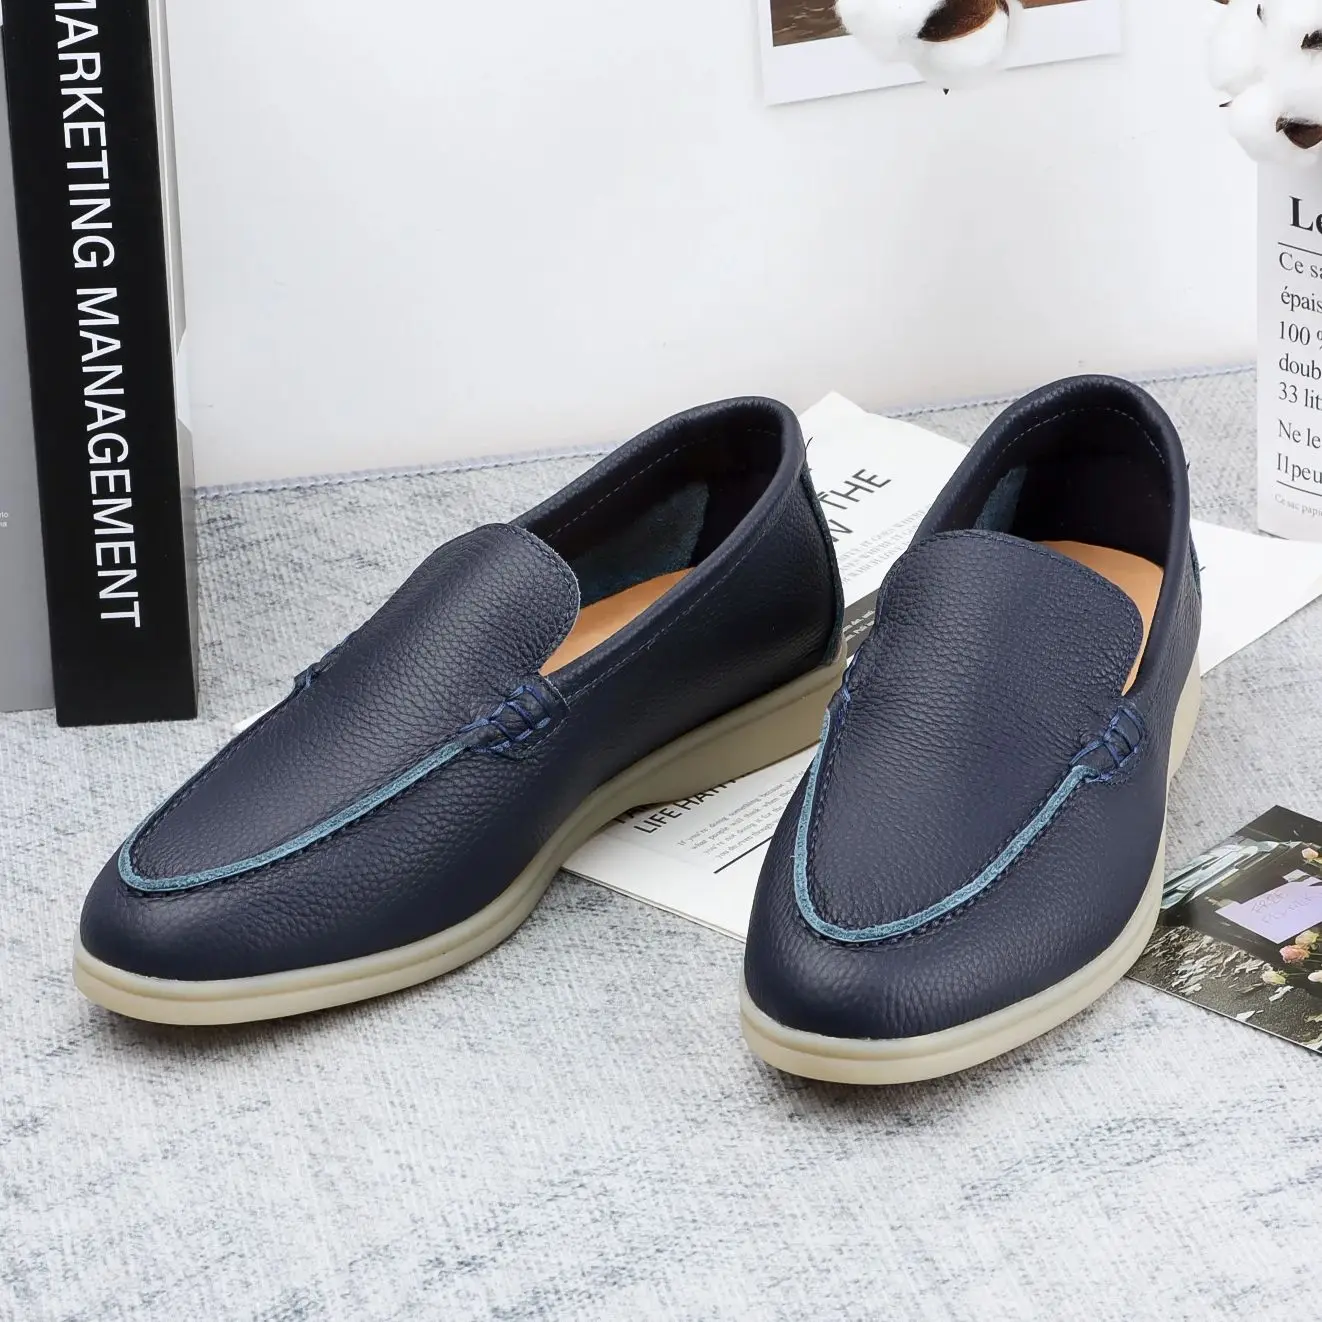 

Spring Autumn High Quality Men's Loafers Genuine Leather Moccasins Lo Shoes For Women Casual Lazy Driving Slip on Mules Sneakers